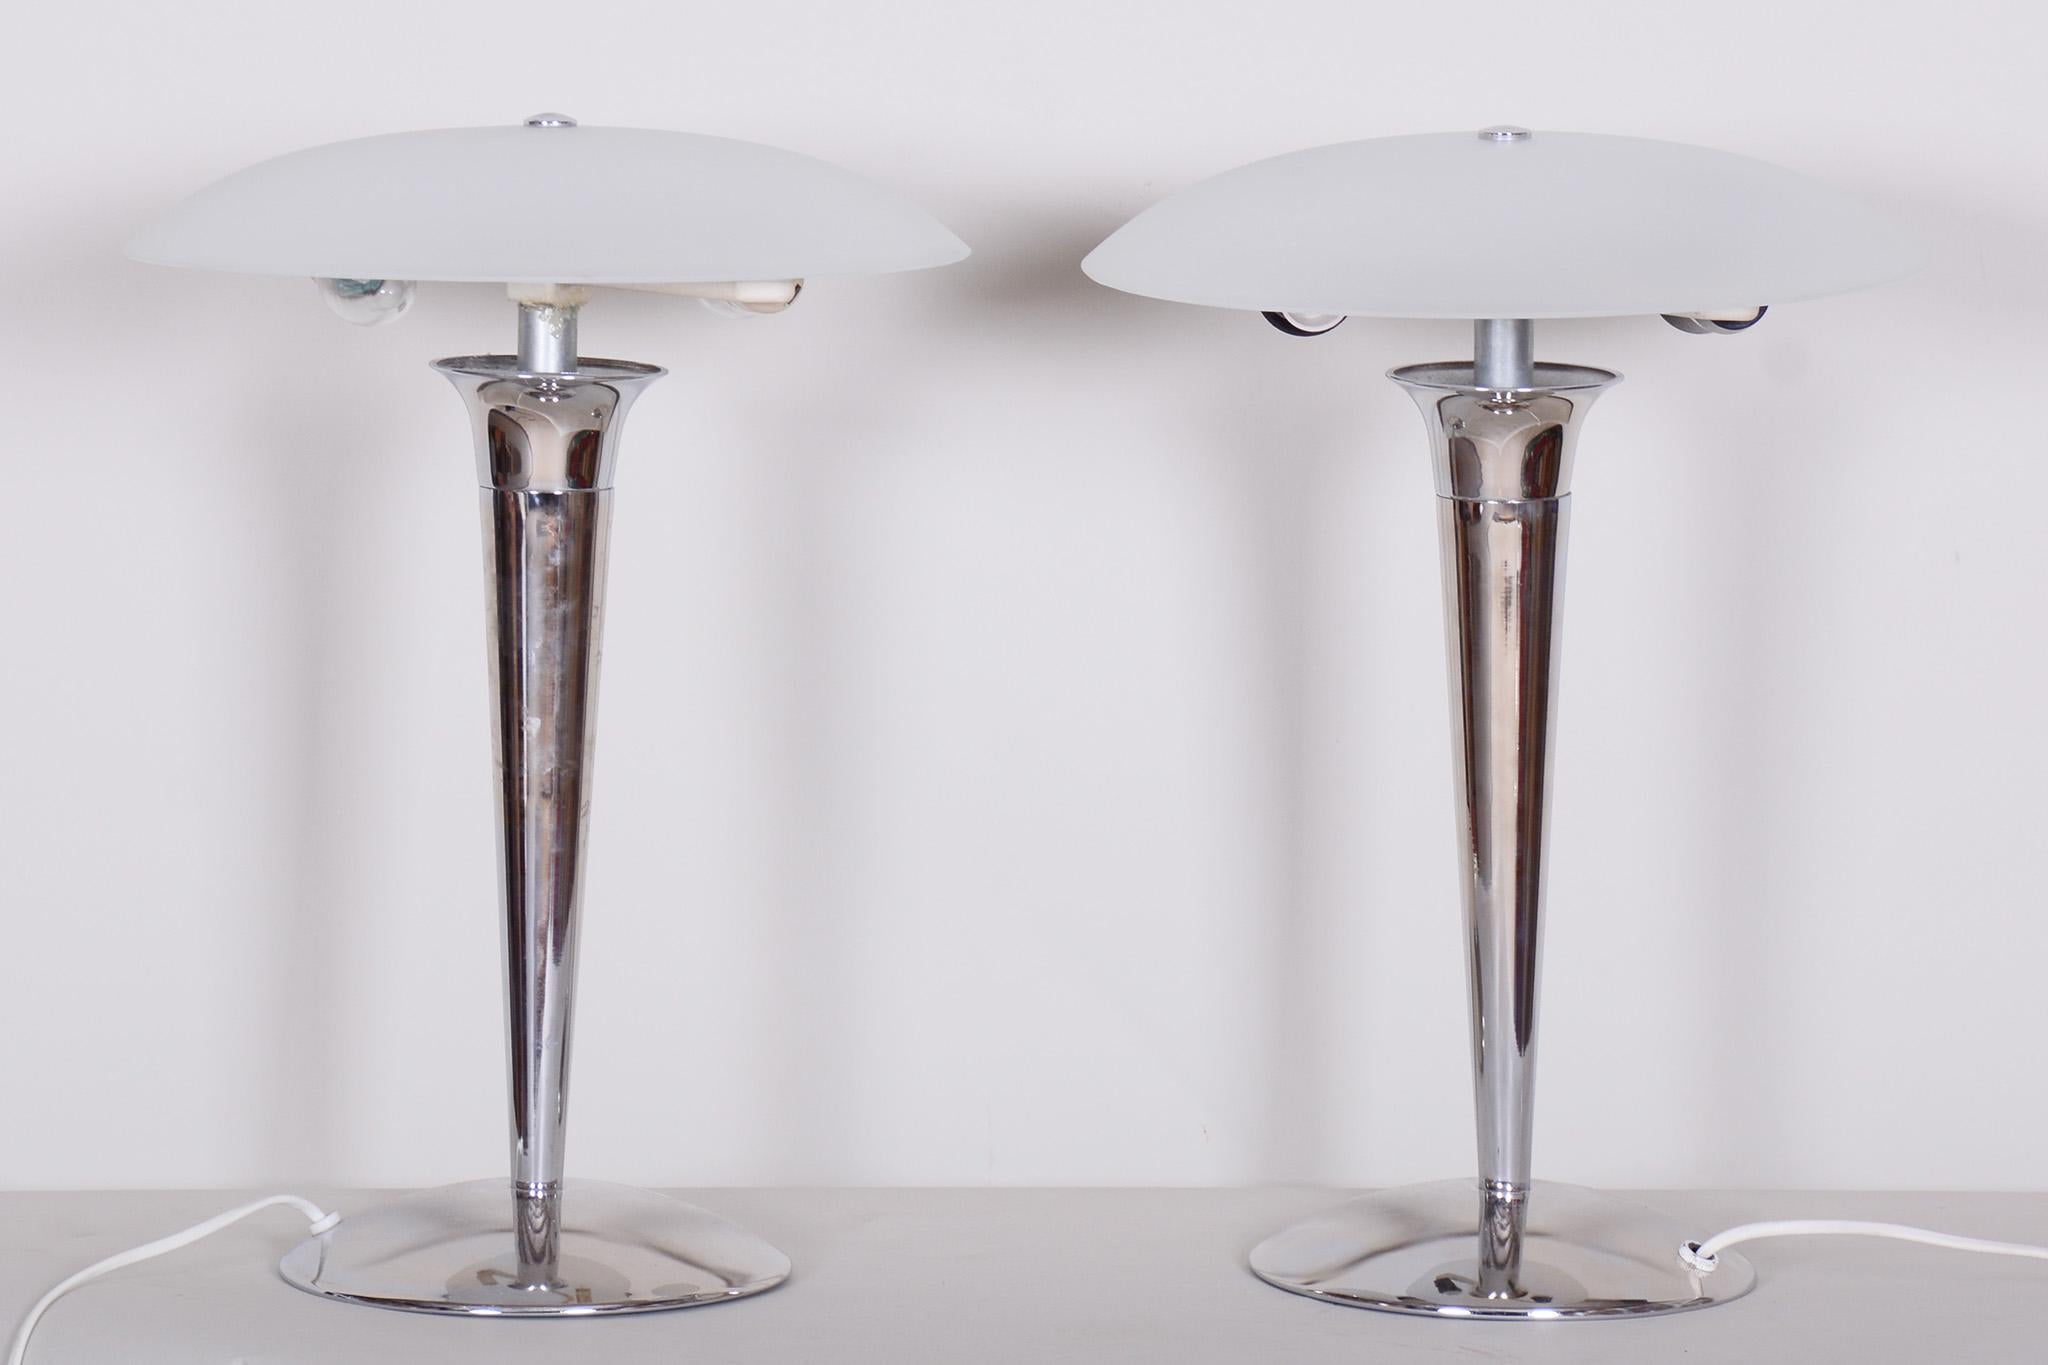 Pair of Midcentury Table Lamps, Chrome-Plated Steel, Milk Glass, Germany, 1950s For Sale 1